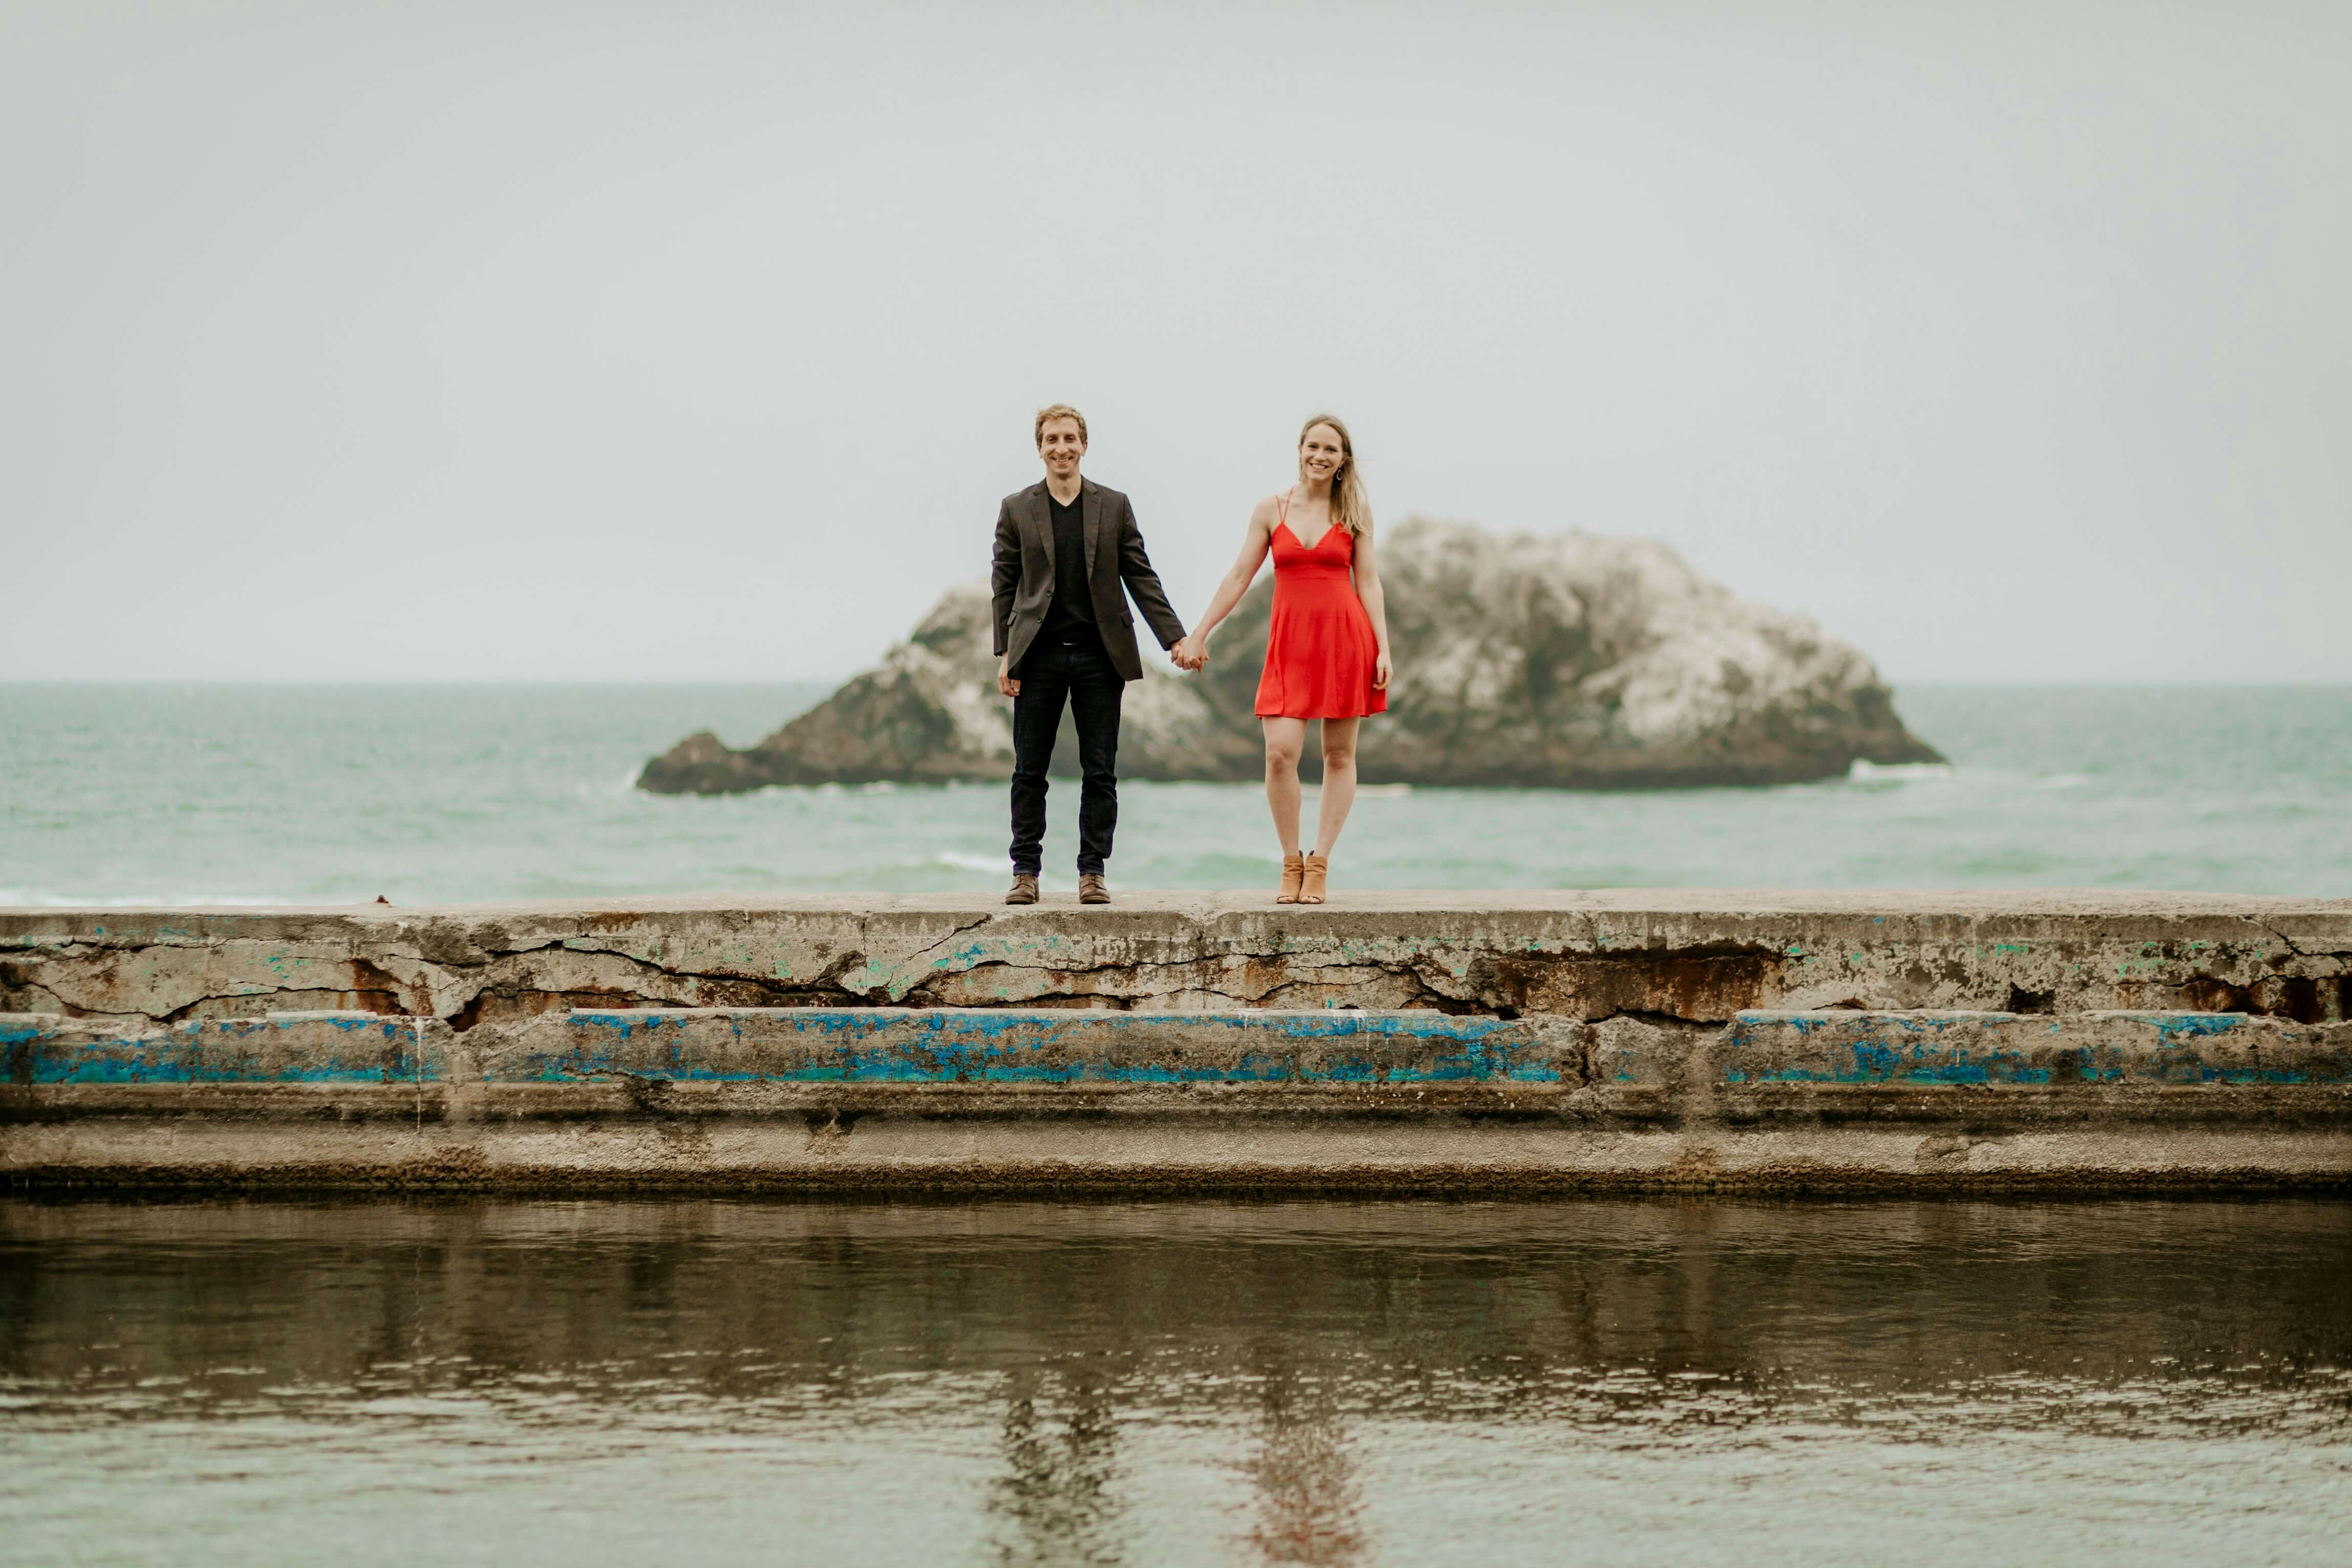 two people posing for an engagement photoshoot on a beach wall